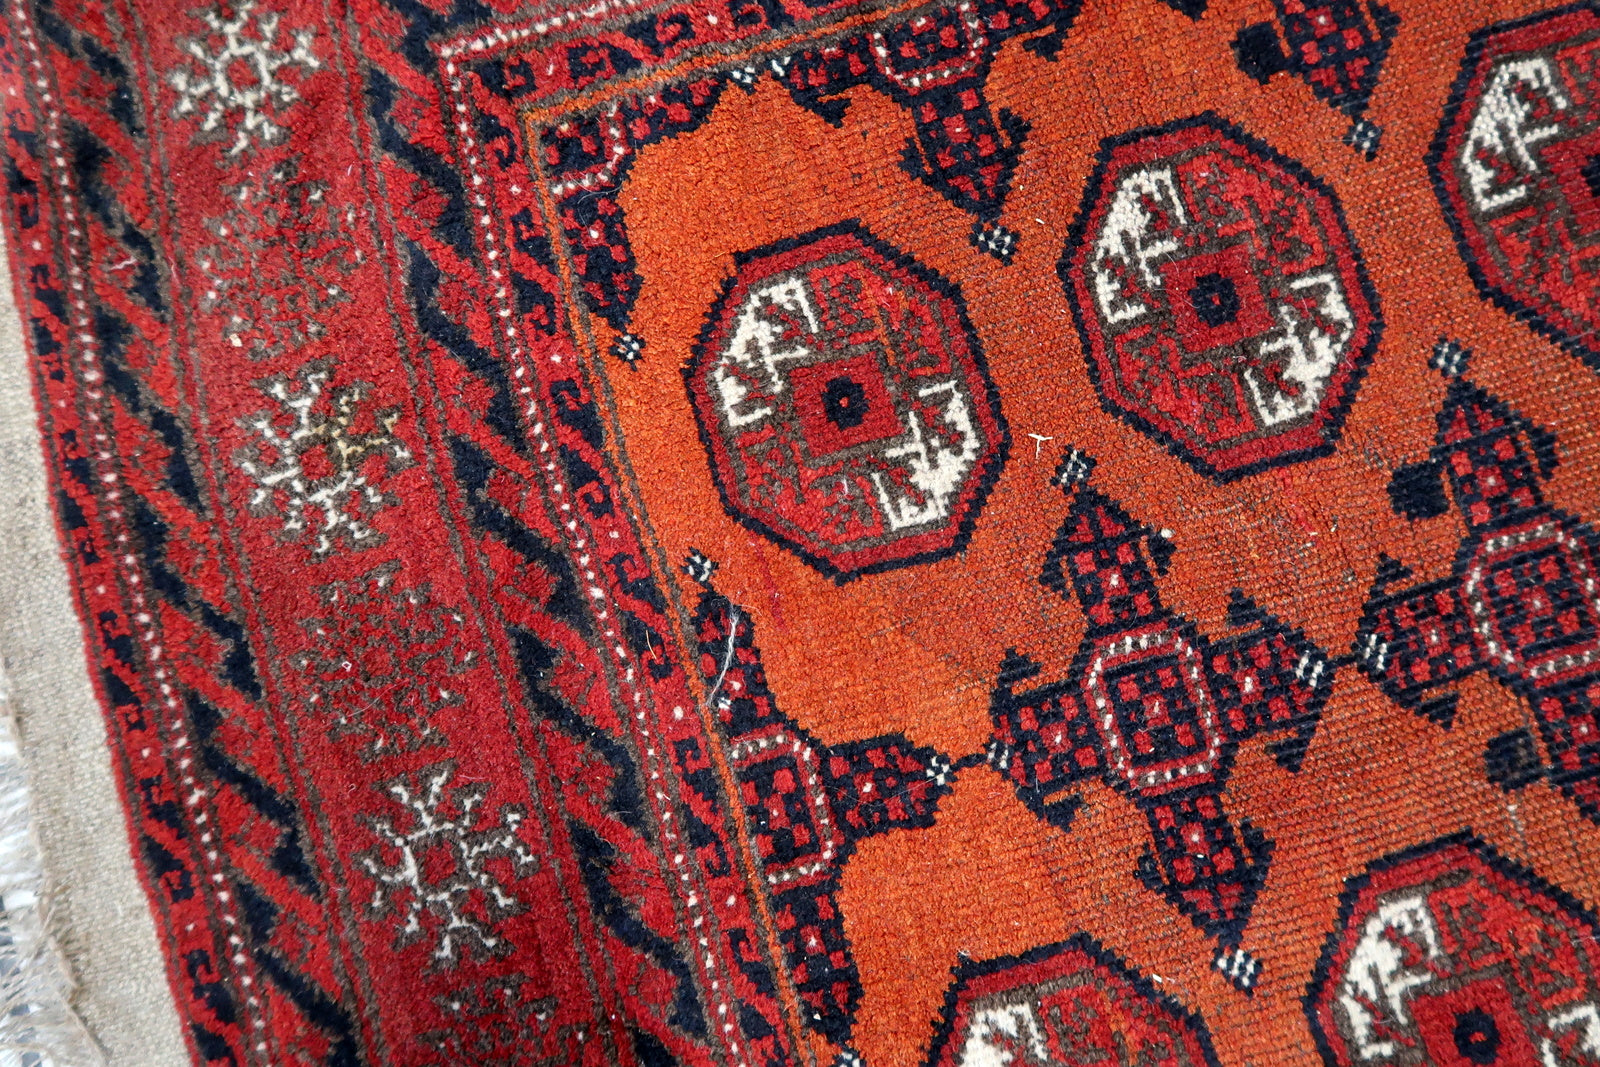 Close-up of intricate patterns on Handmade Antique Afghan Baluch Rug - Detailed view showcasing the intricate geometric designs, adding to the rug's appeal.